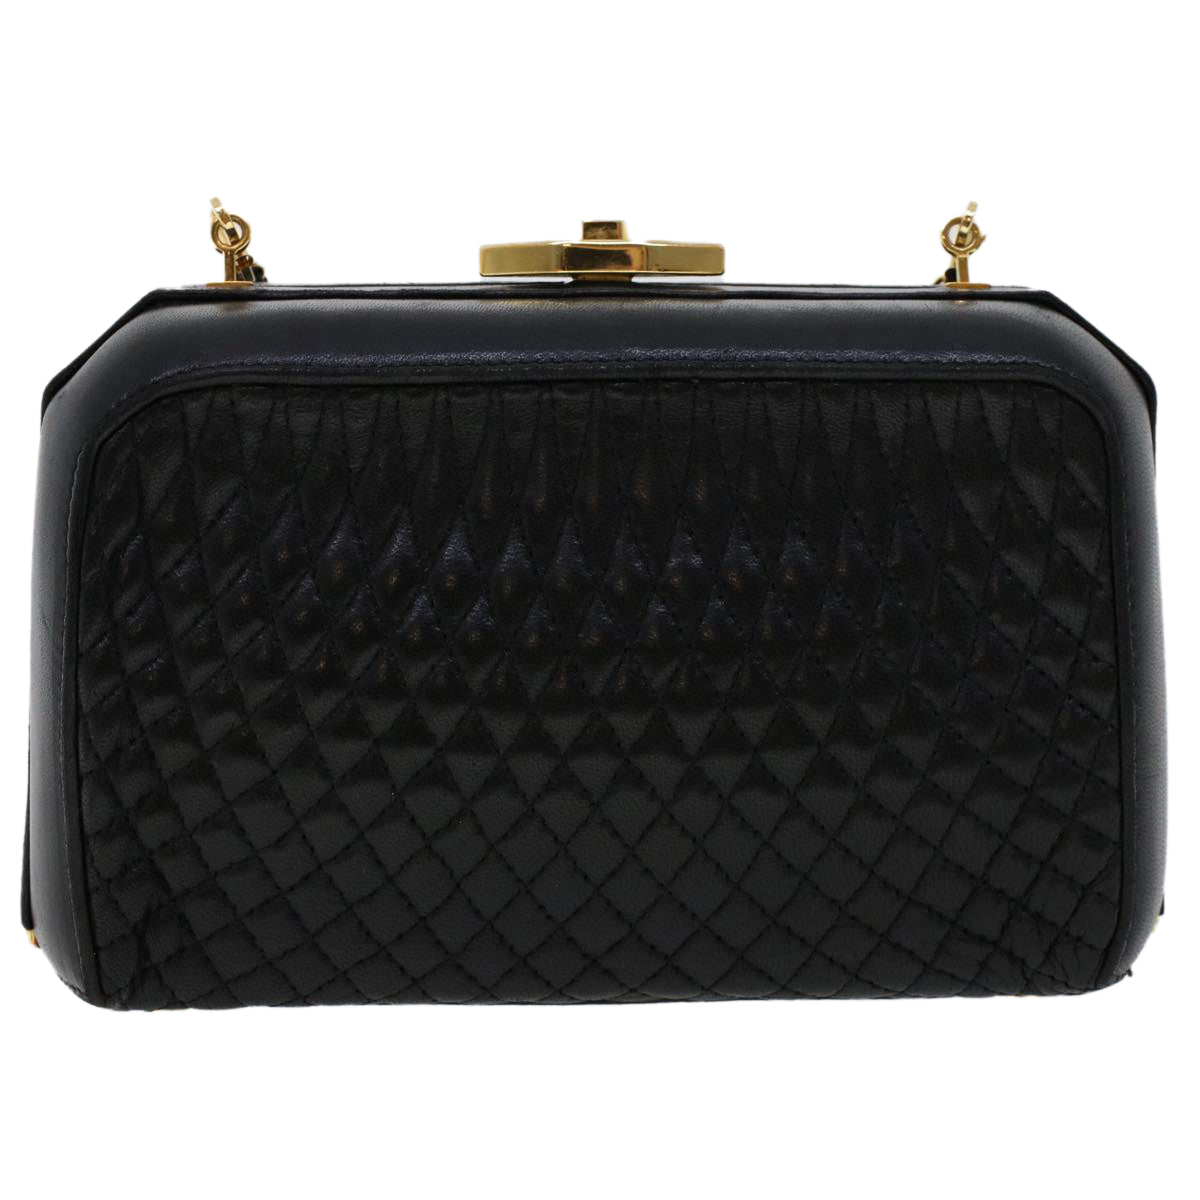 BALLY Quilted Chain Shoulder Bag Leather Black Auth 45950 - 0